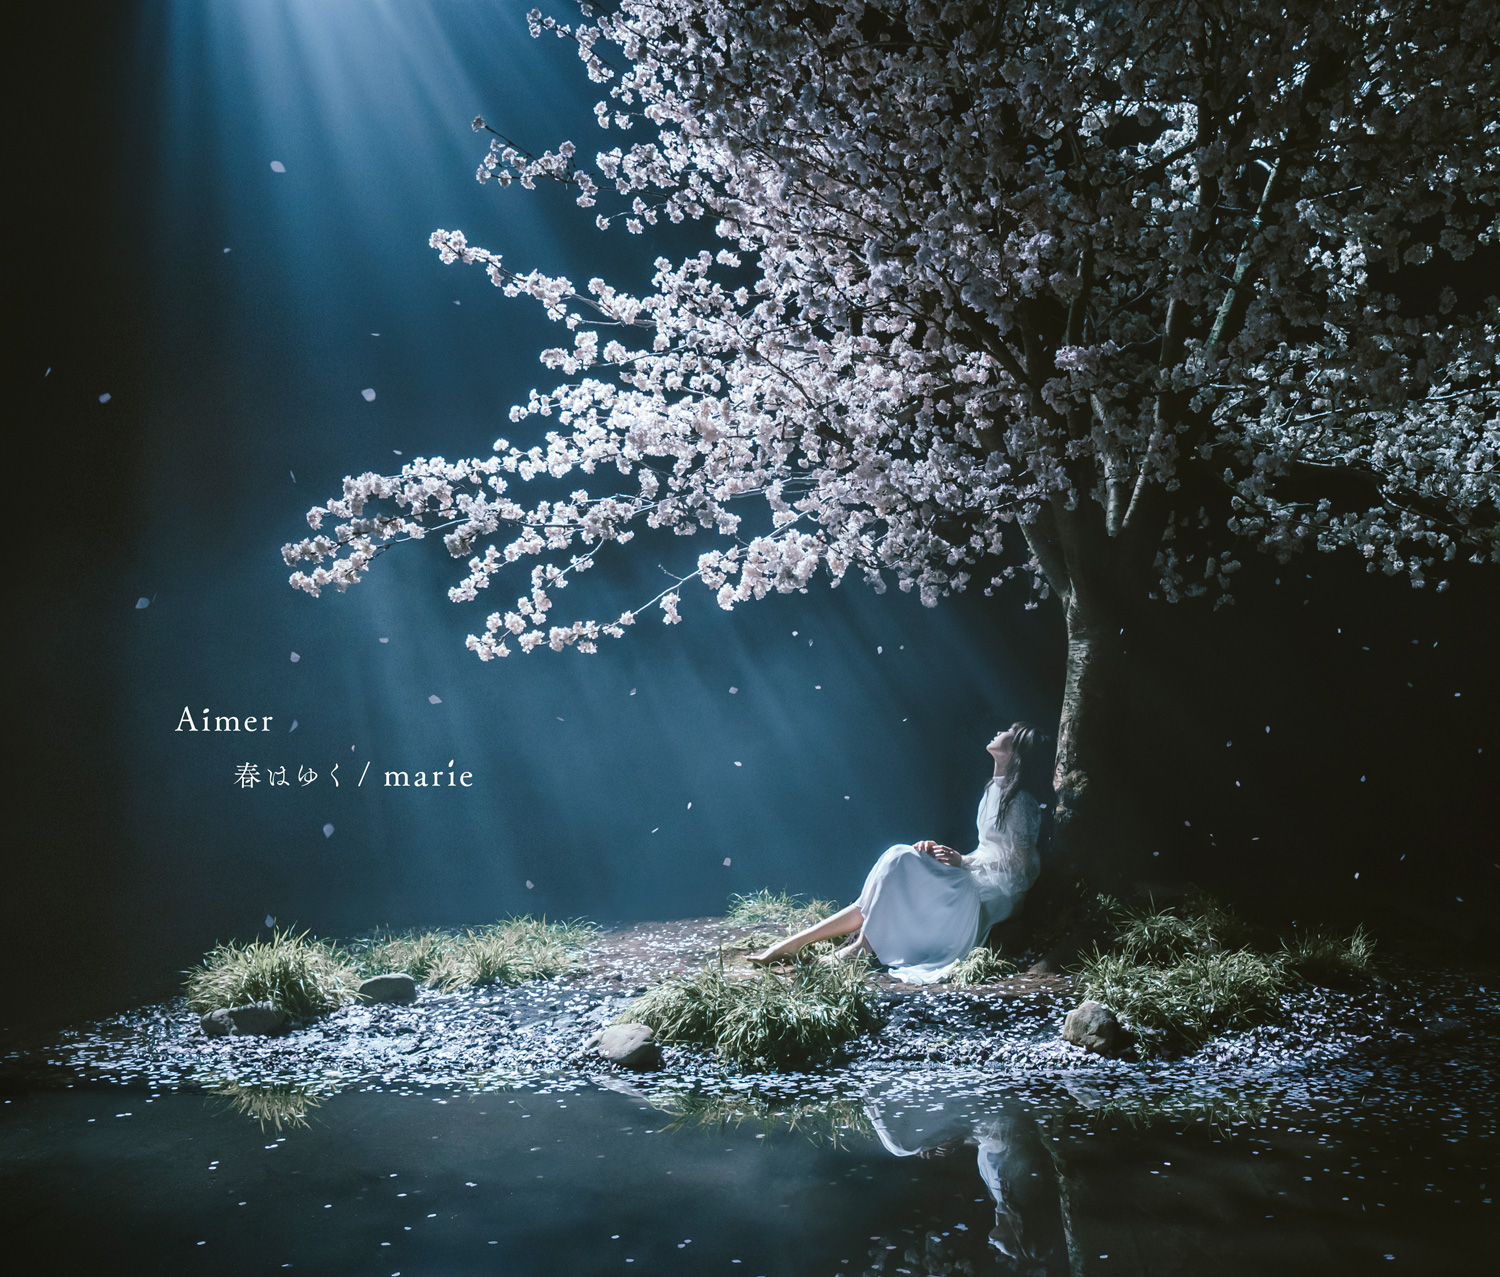 Aimer A Singer And Her Captivating Voice Shining Light Into The